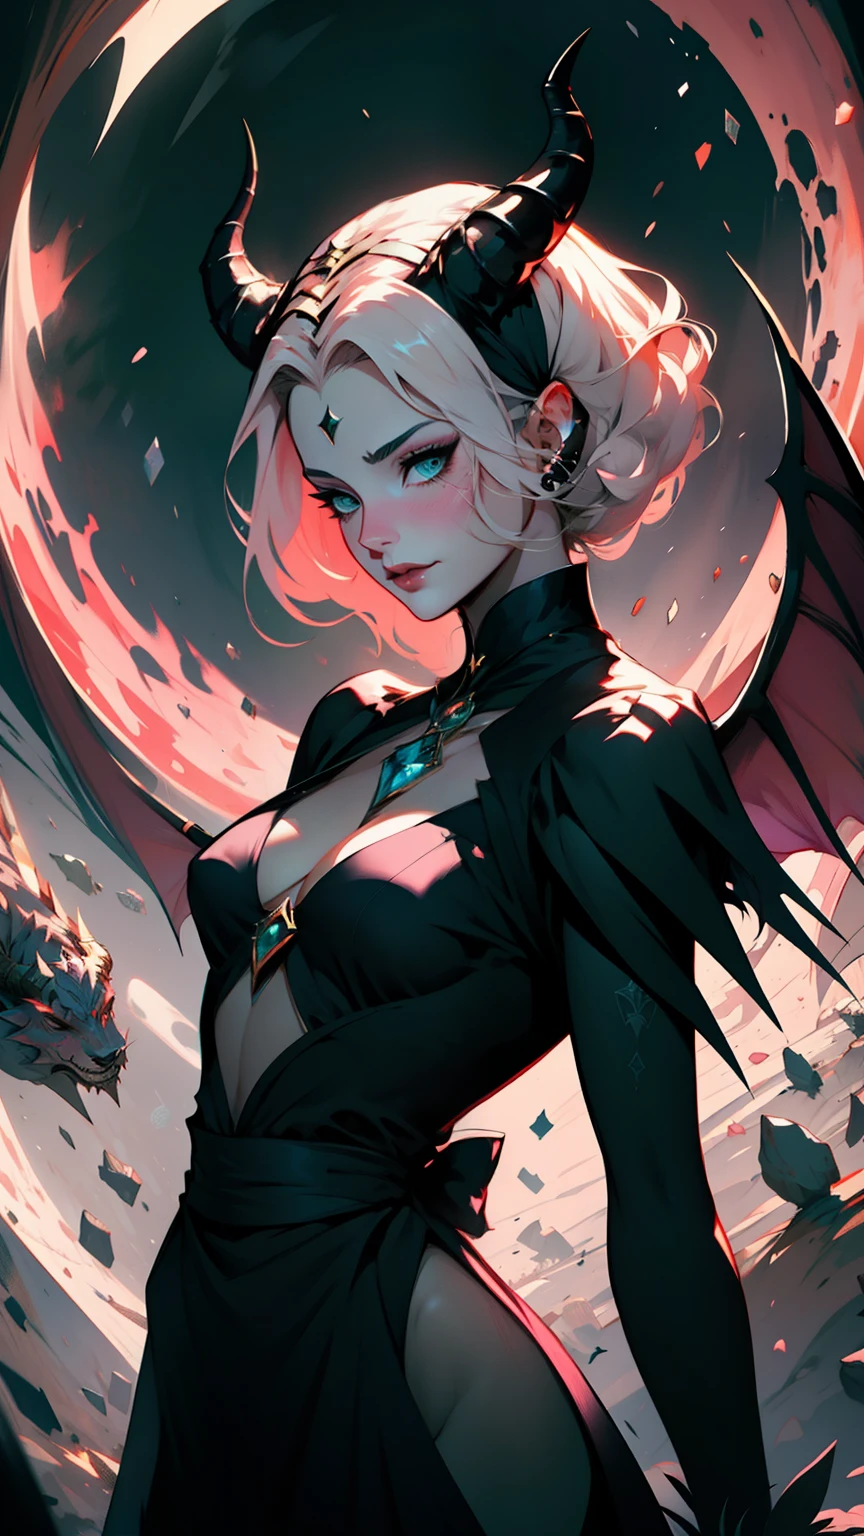 1womanl, dressed up as maleficent, strong emotions, sakura, shorth hair, Lumiere, focusing, how malevolent, fully body, horns on head, 独奏, magic around you. random00d . illustration